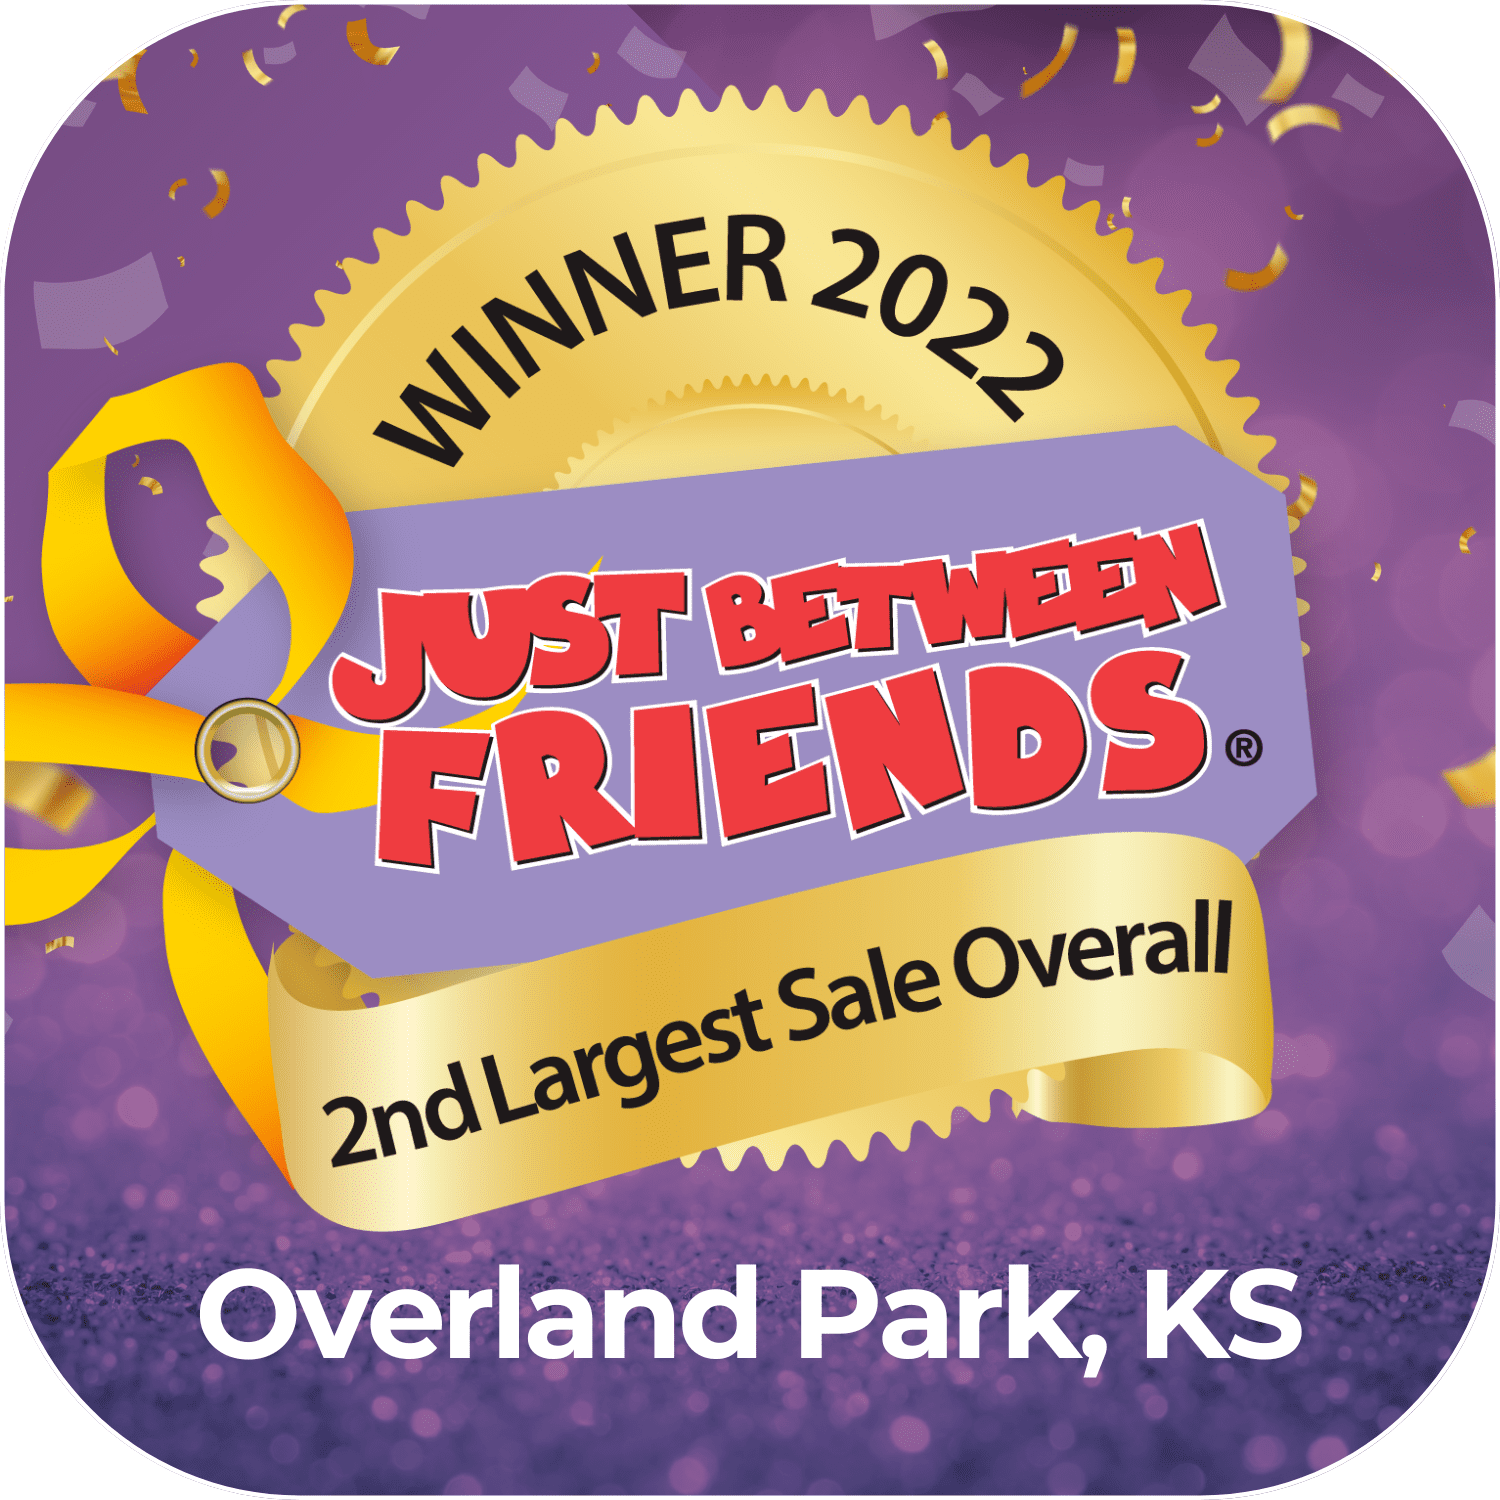 The Overland Park, KS sale was the 2022 winner for the 2nd largest sale in the nation.